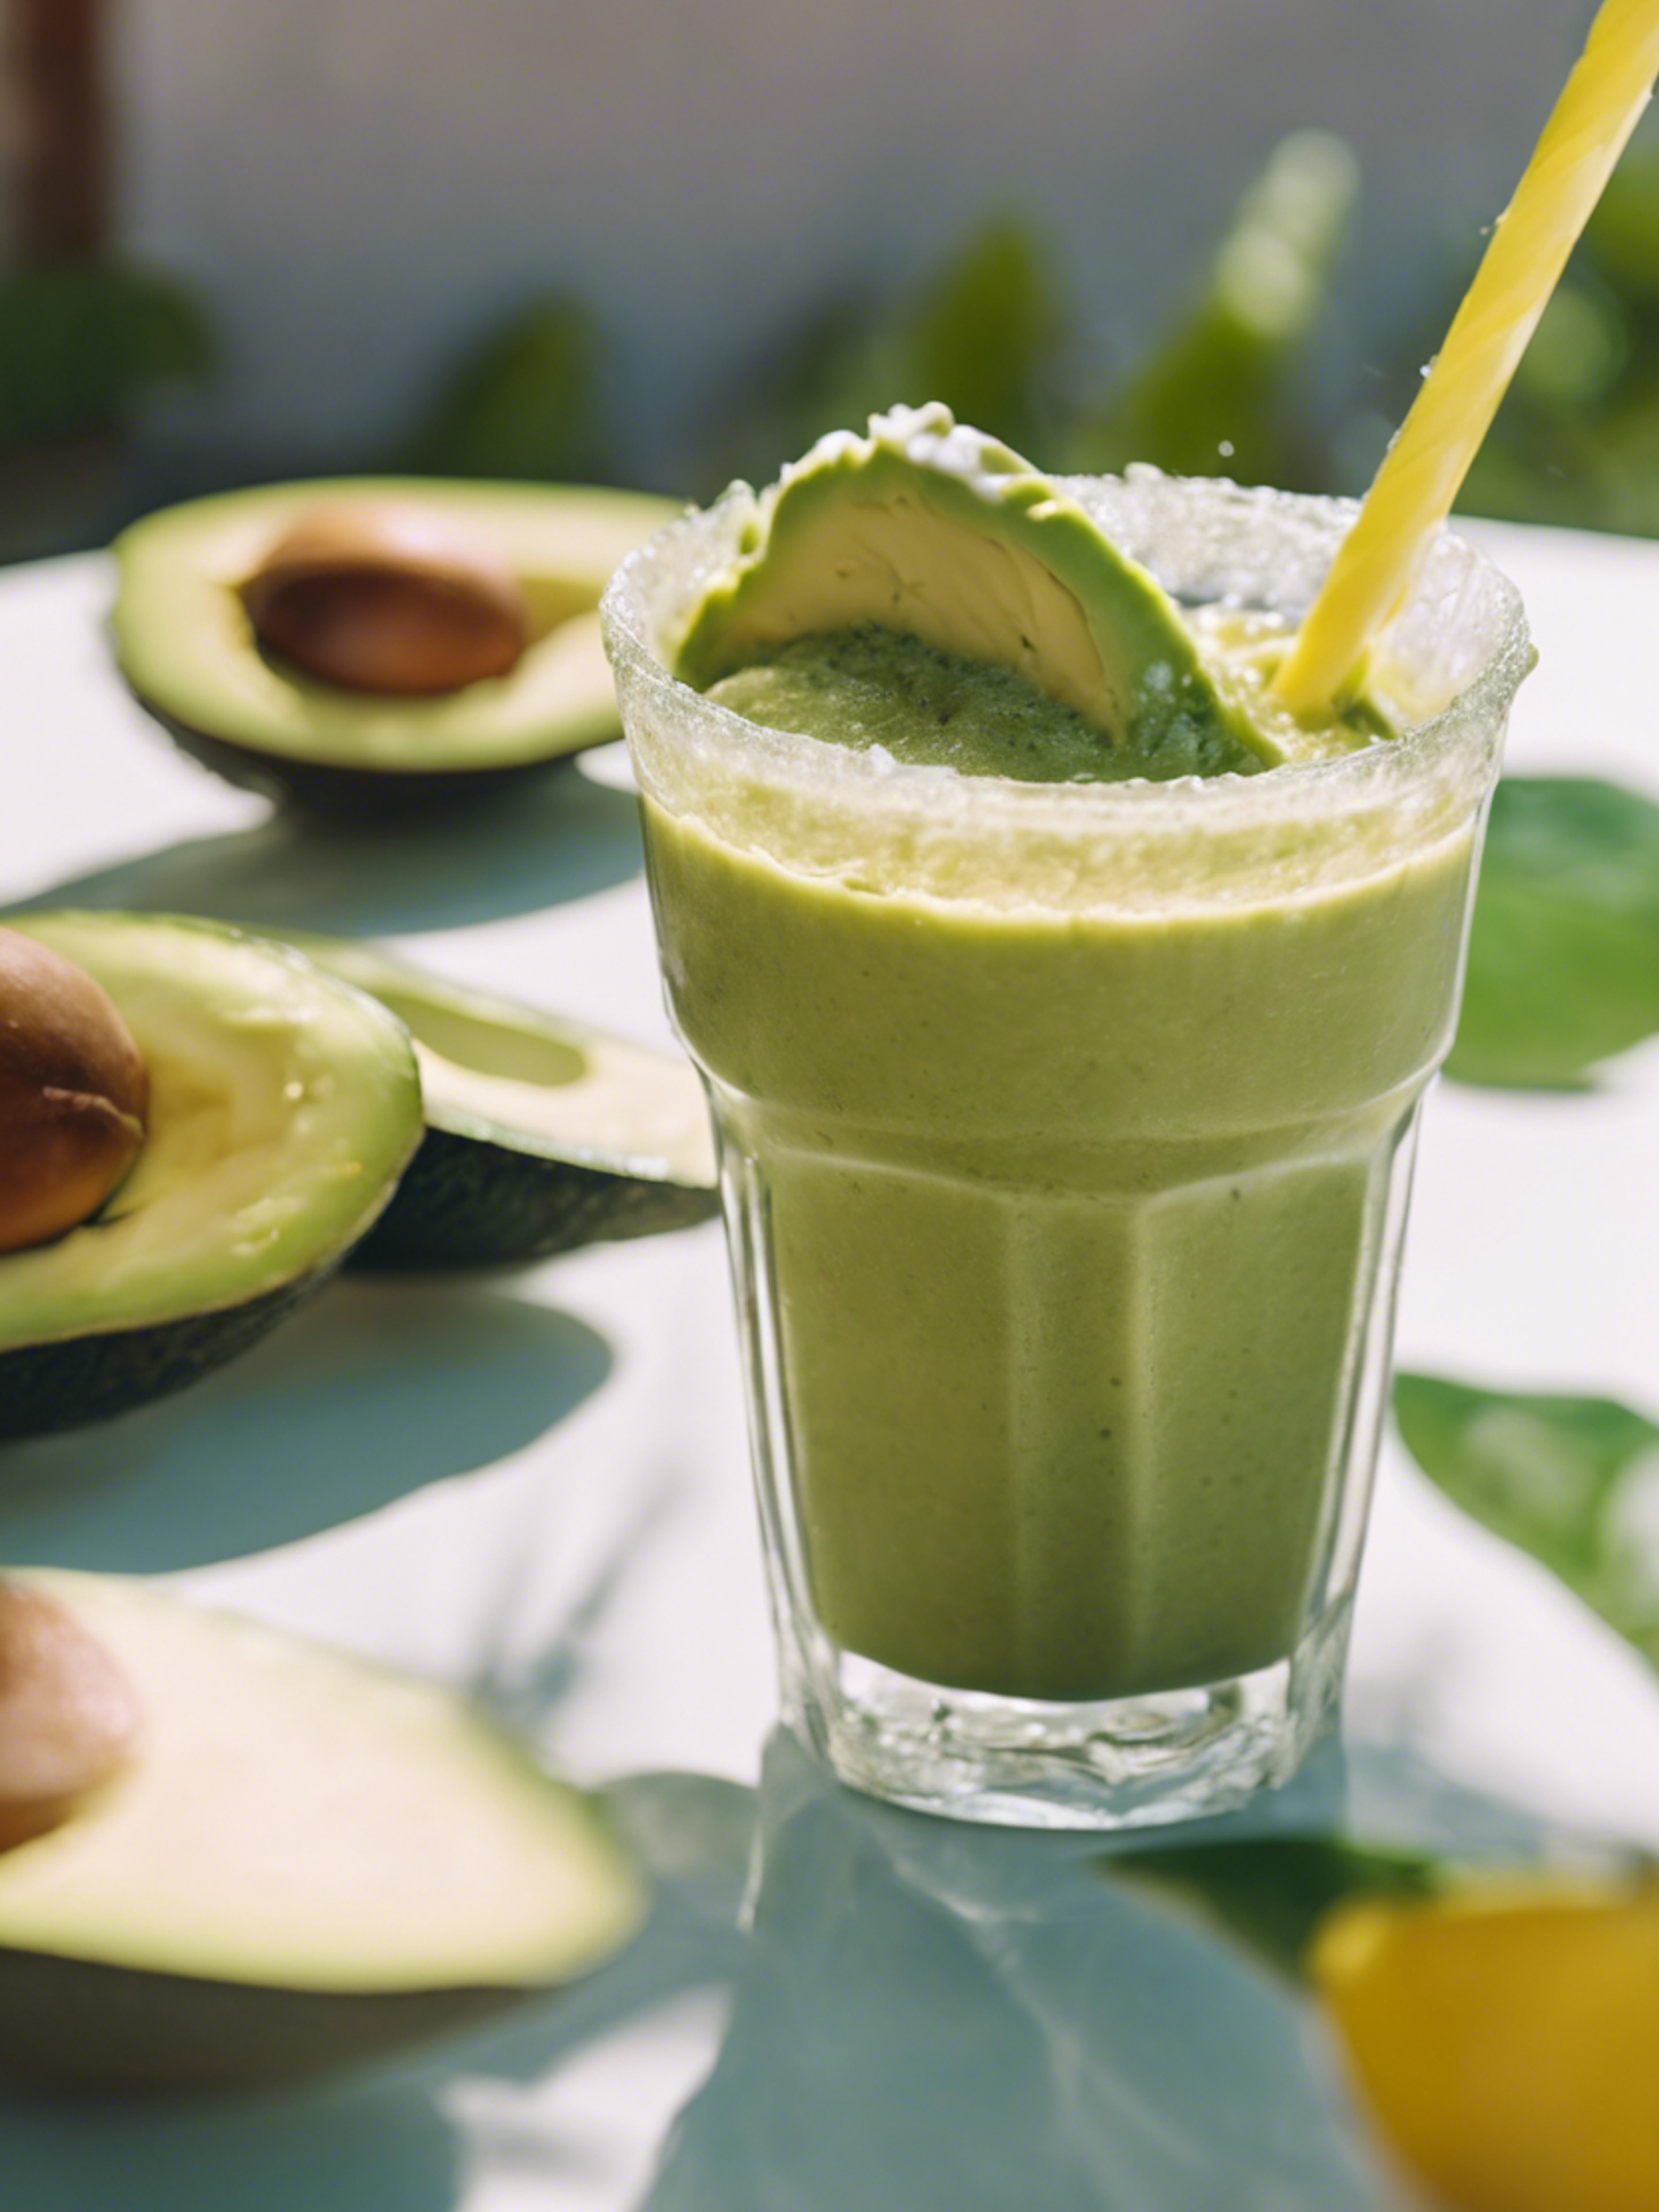 A playful avocado sipping on tropical smoothie on a hot summer day Tapeta[3b128a2f6f1a4fb38d08]